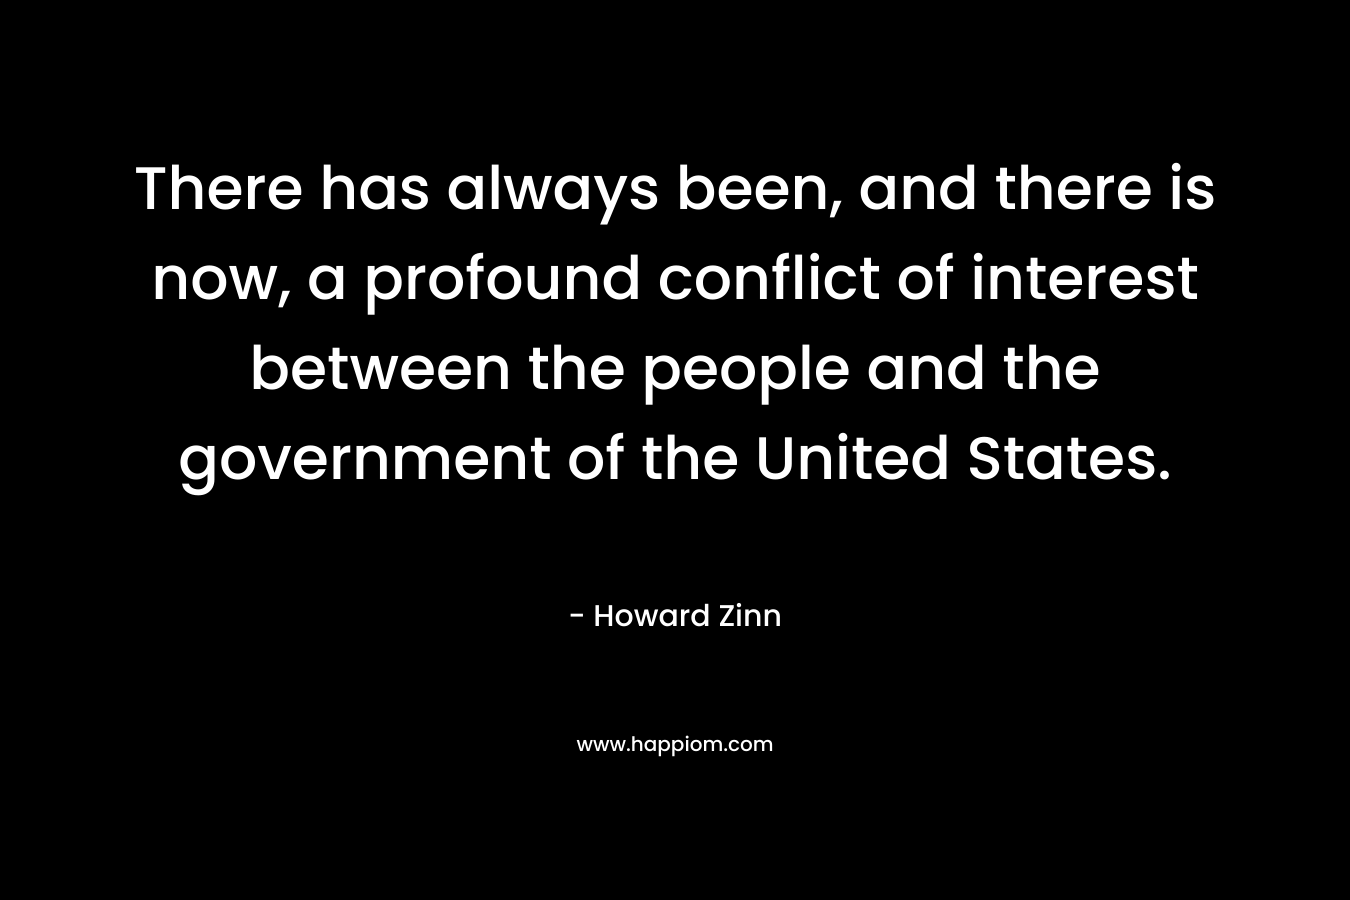 There has always been, and there is now, a profound conflict of interest between the people and the government of the United States.